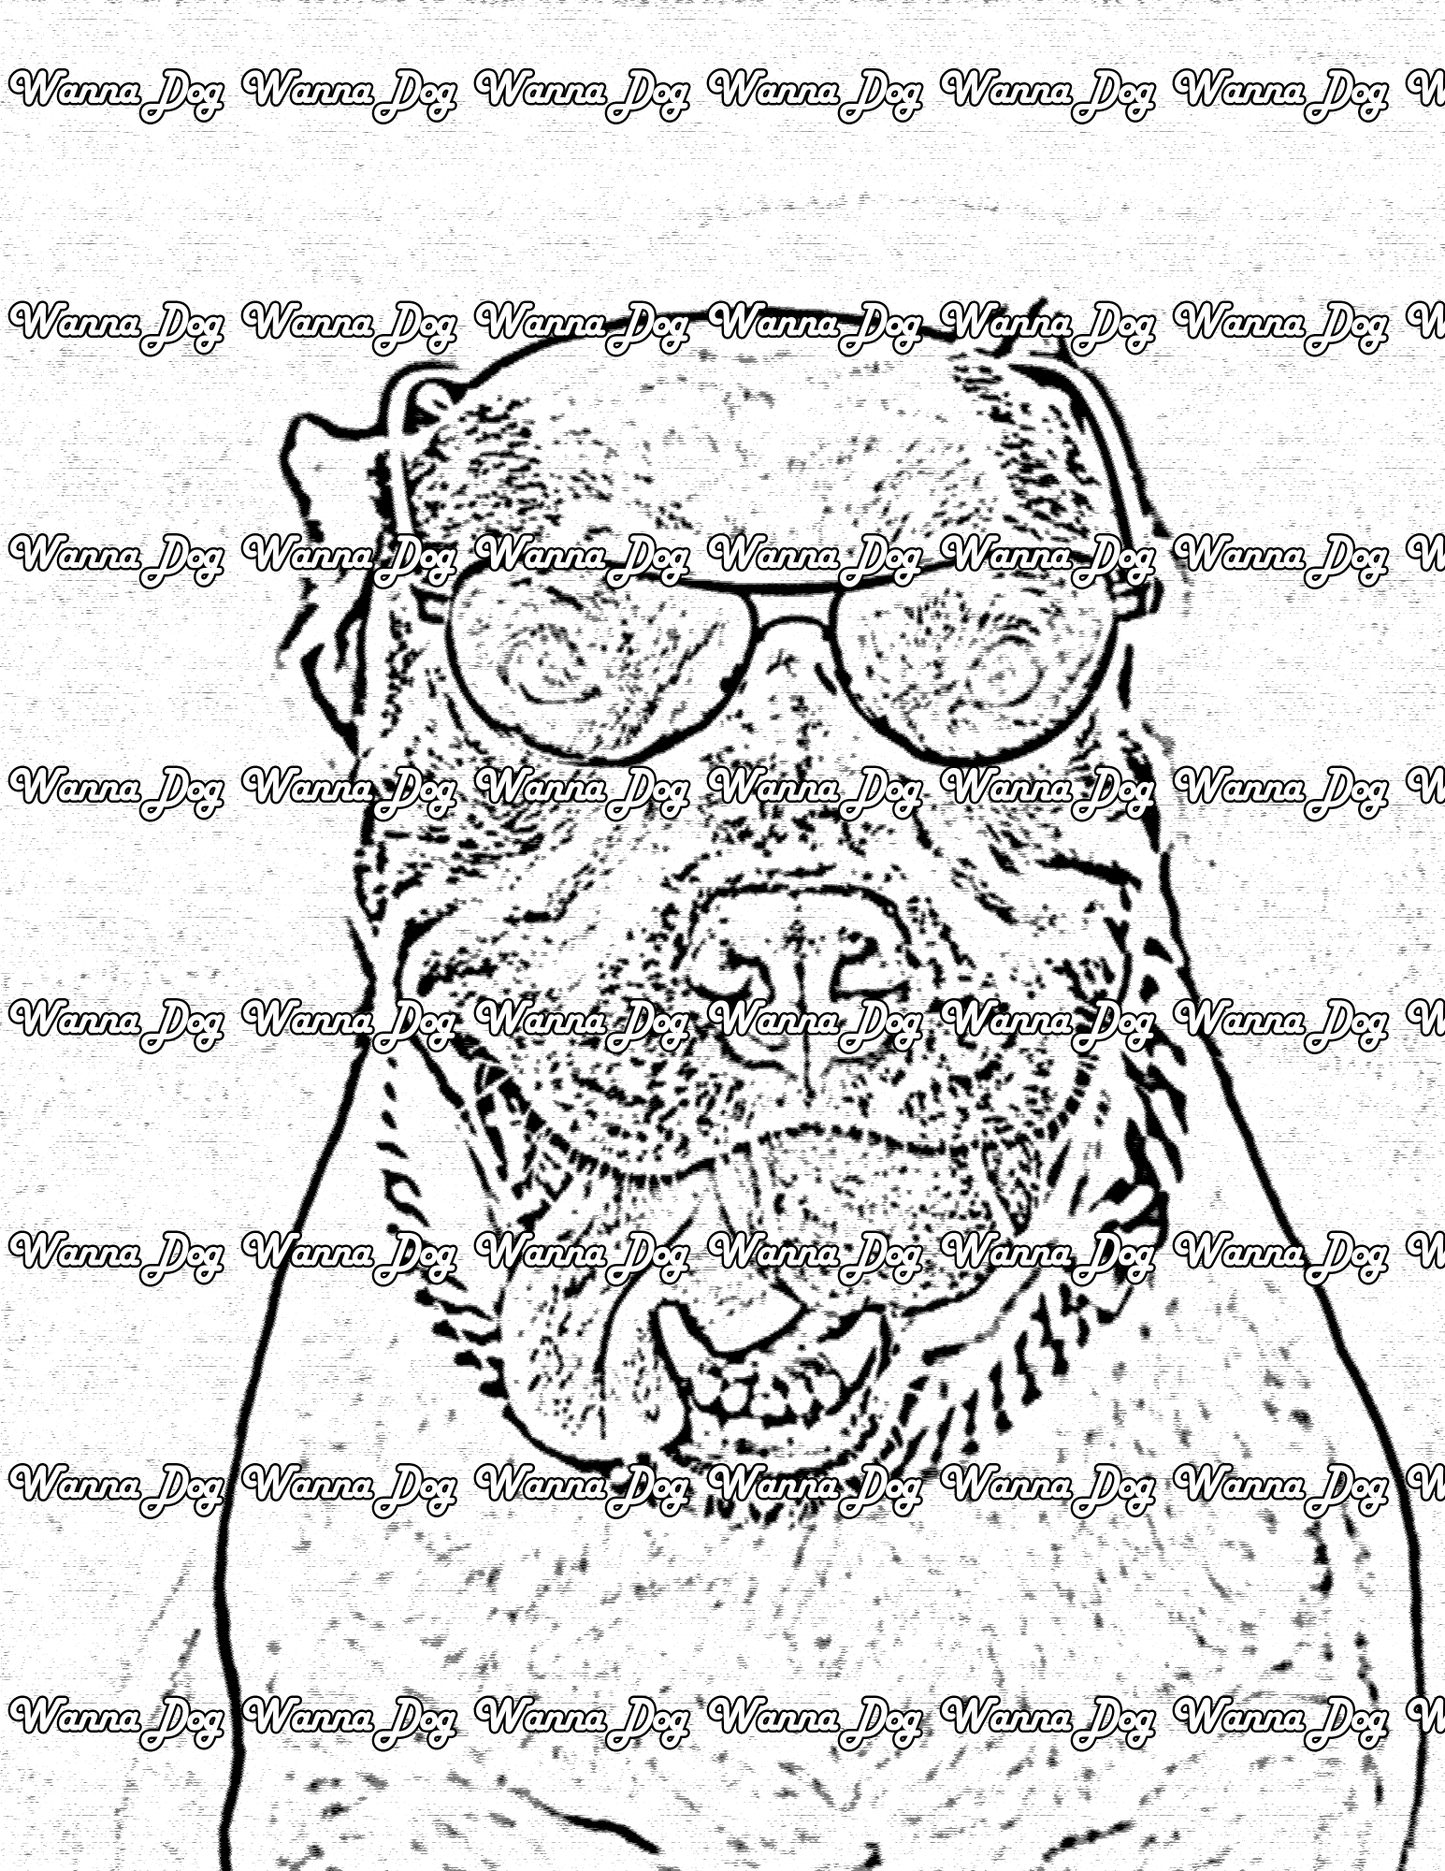 Pitbull Coloring Pages of a Pitbull wearing glasses, a tennis ball in their mouth, and tongue out